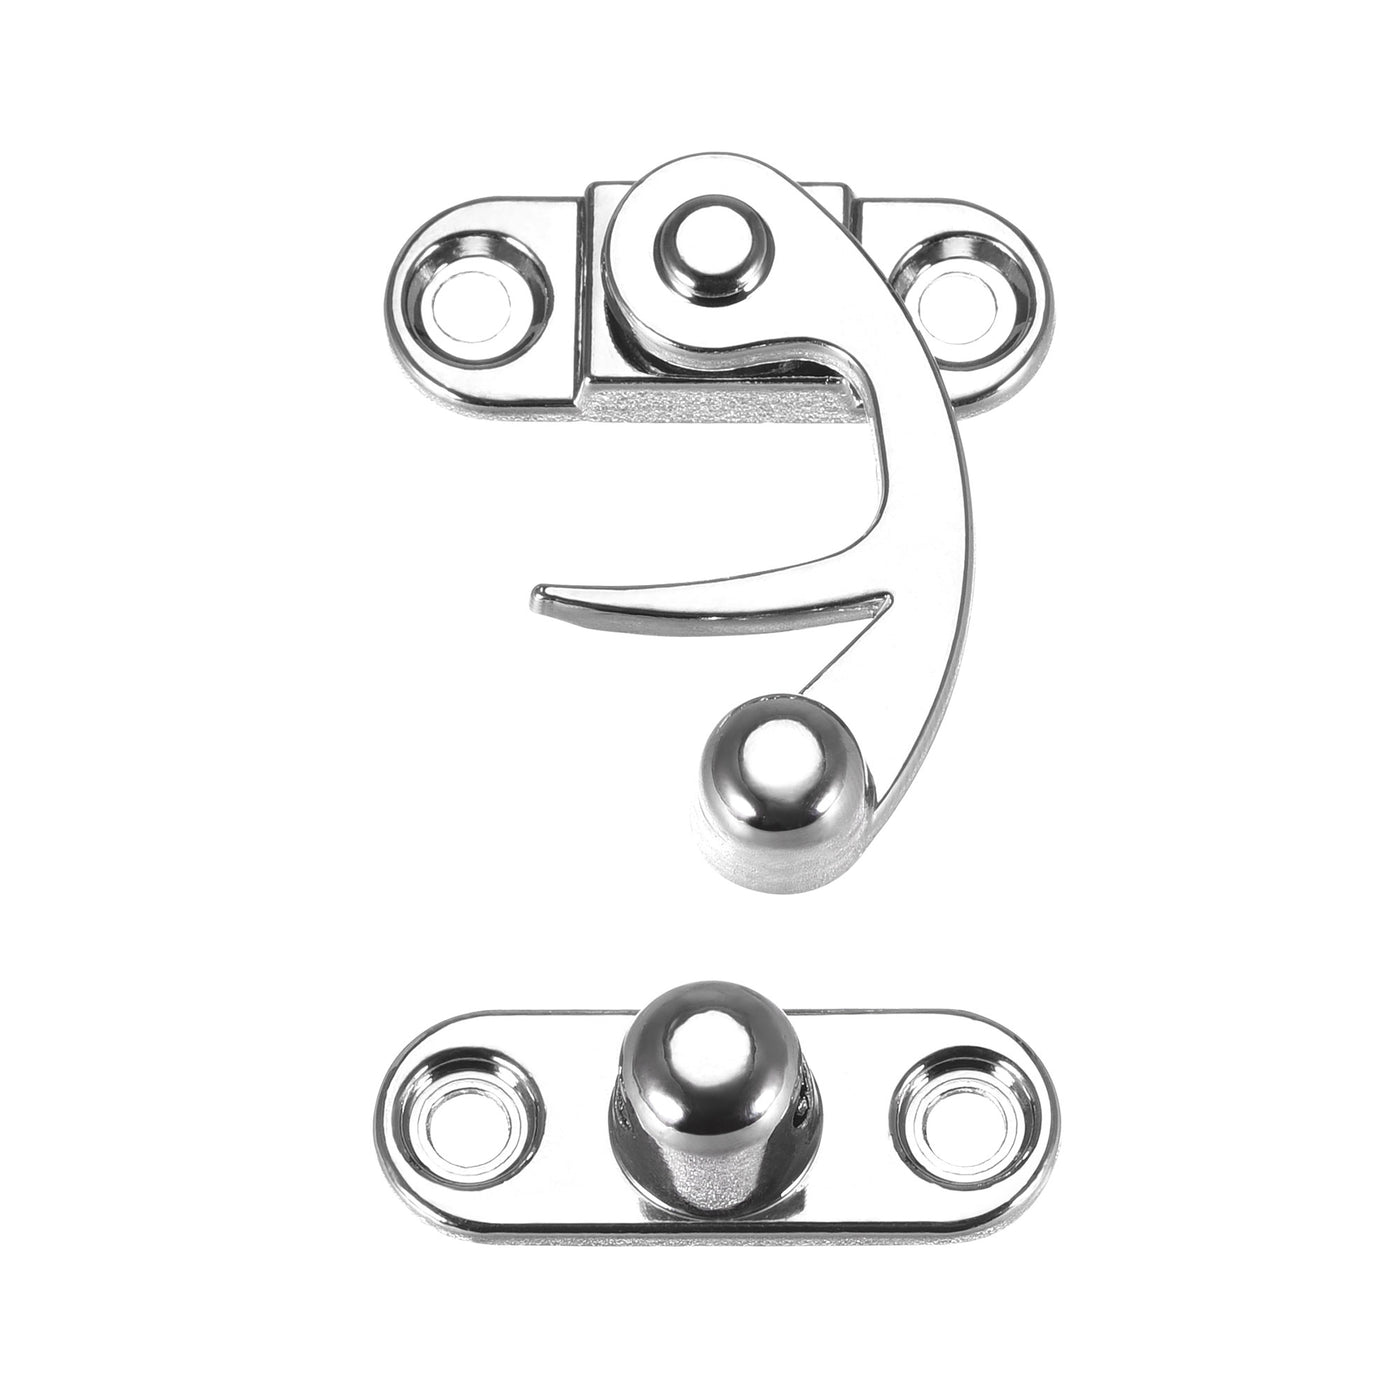 uxcell Uxcell Antique Vintage Lock Clasp Right Latch Hook Hasp 33mmx28mm Swing Arm Latch Silver Tone 5 Pcs